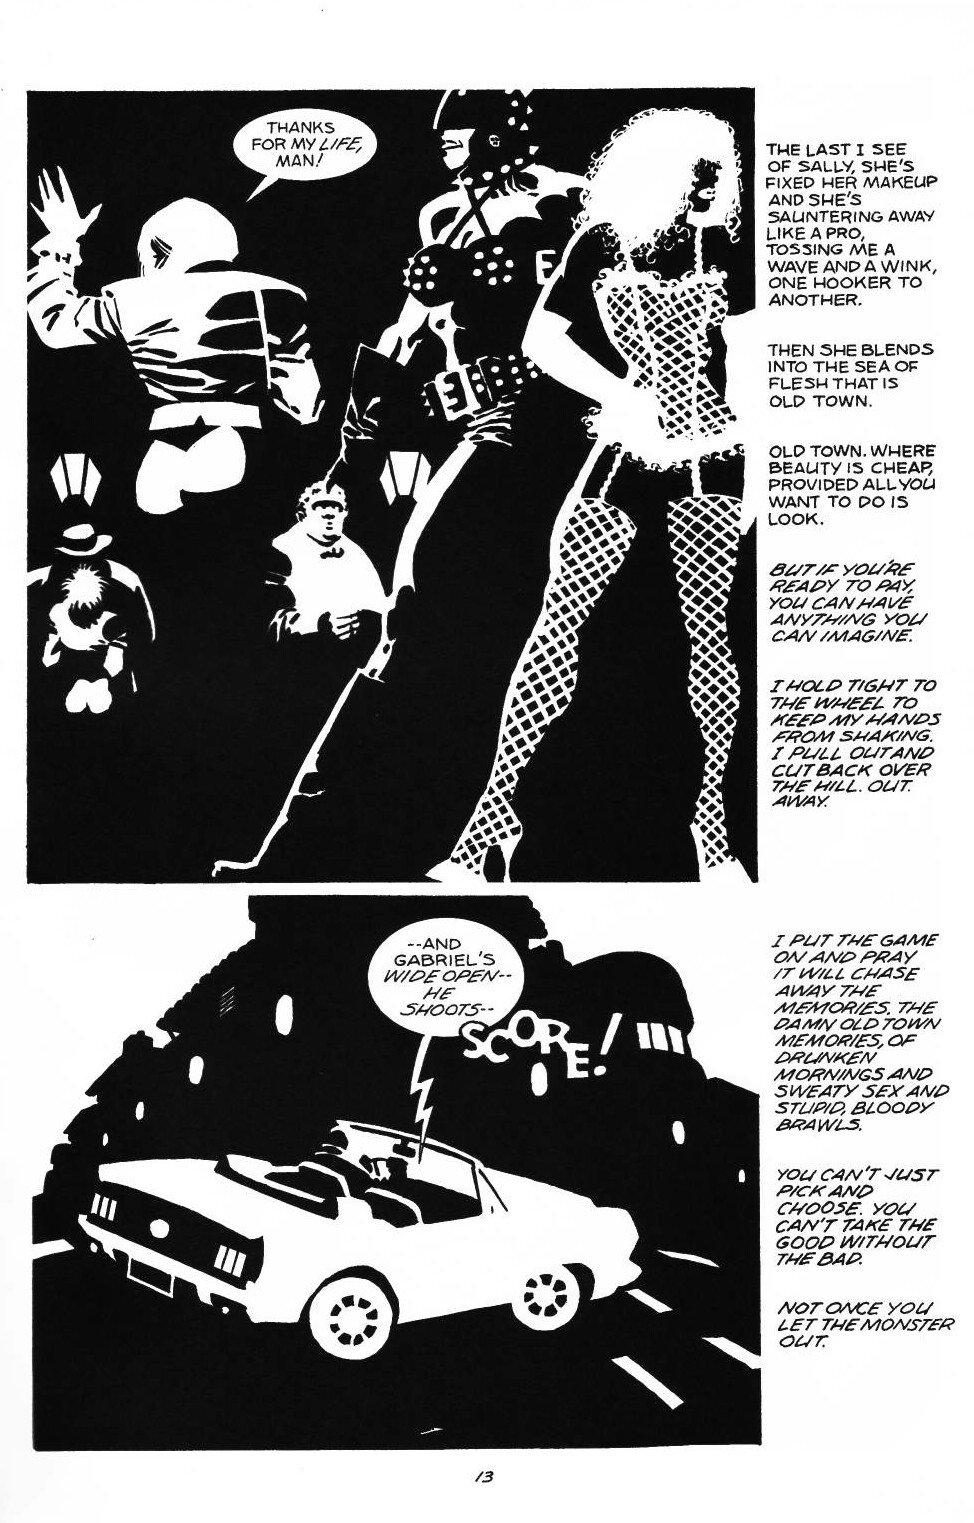 Sin City: A Dame To Kill For Episode 1-A